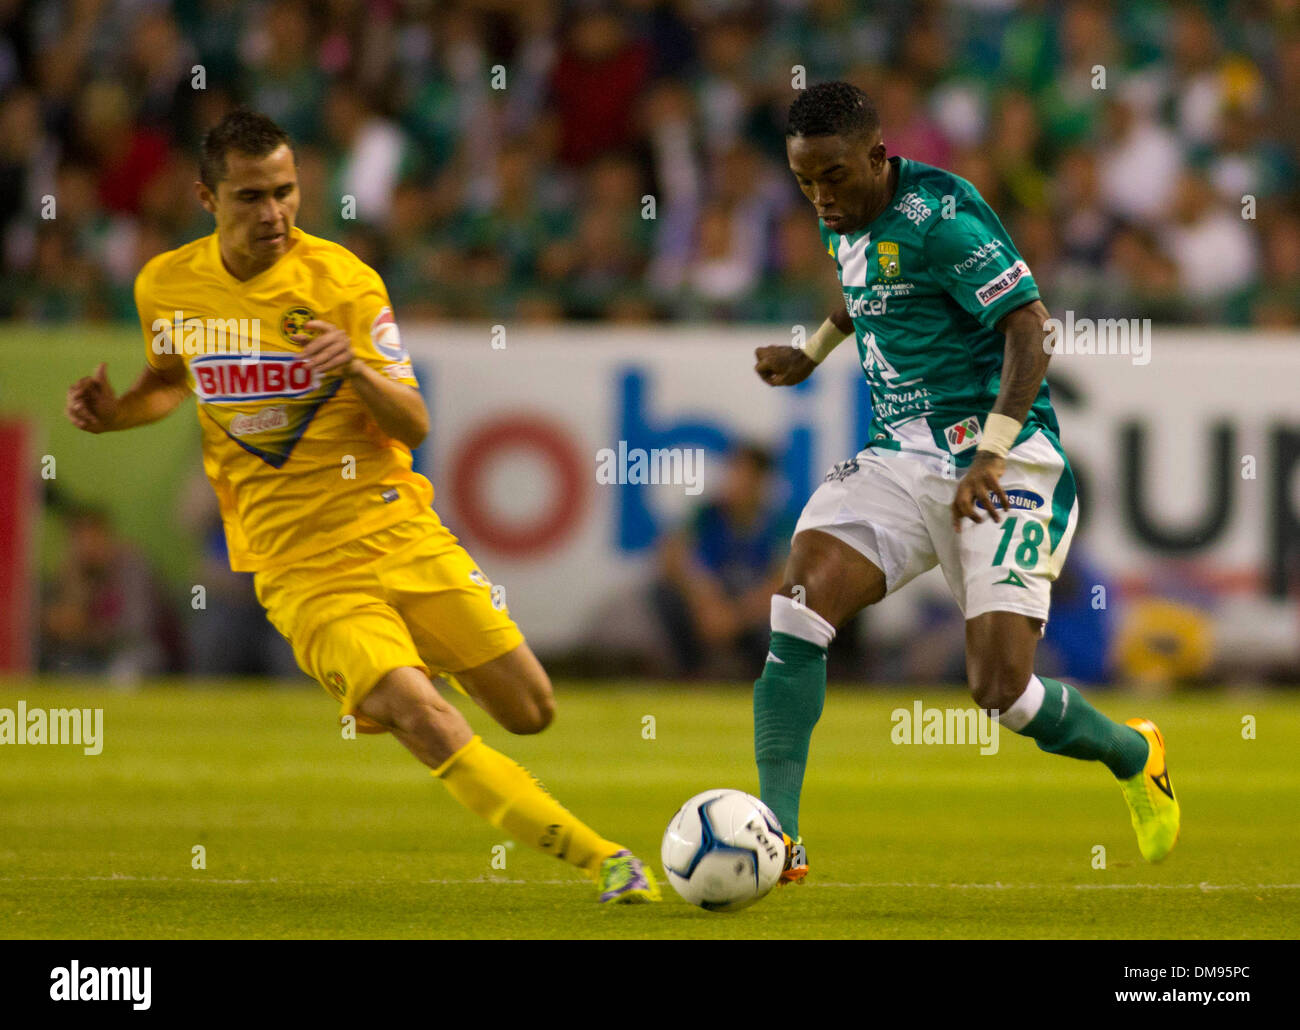 Leon, Mexico. 12th Dec, 2013. Leon's Hernan Burbano (R) vies for the ball with America's Paul Aguilar during the first leg final match of the Liga MX, against America, held in Leon Stadium, in Leon city, Guanajuato, Mexico, on Dec. 12, 2013. © Leopoldo Smith Murillo/Xinhua/Alamy Live News Stock Photo